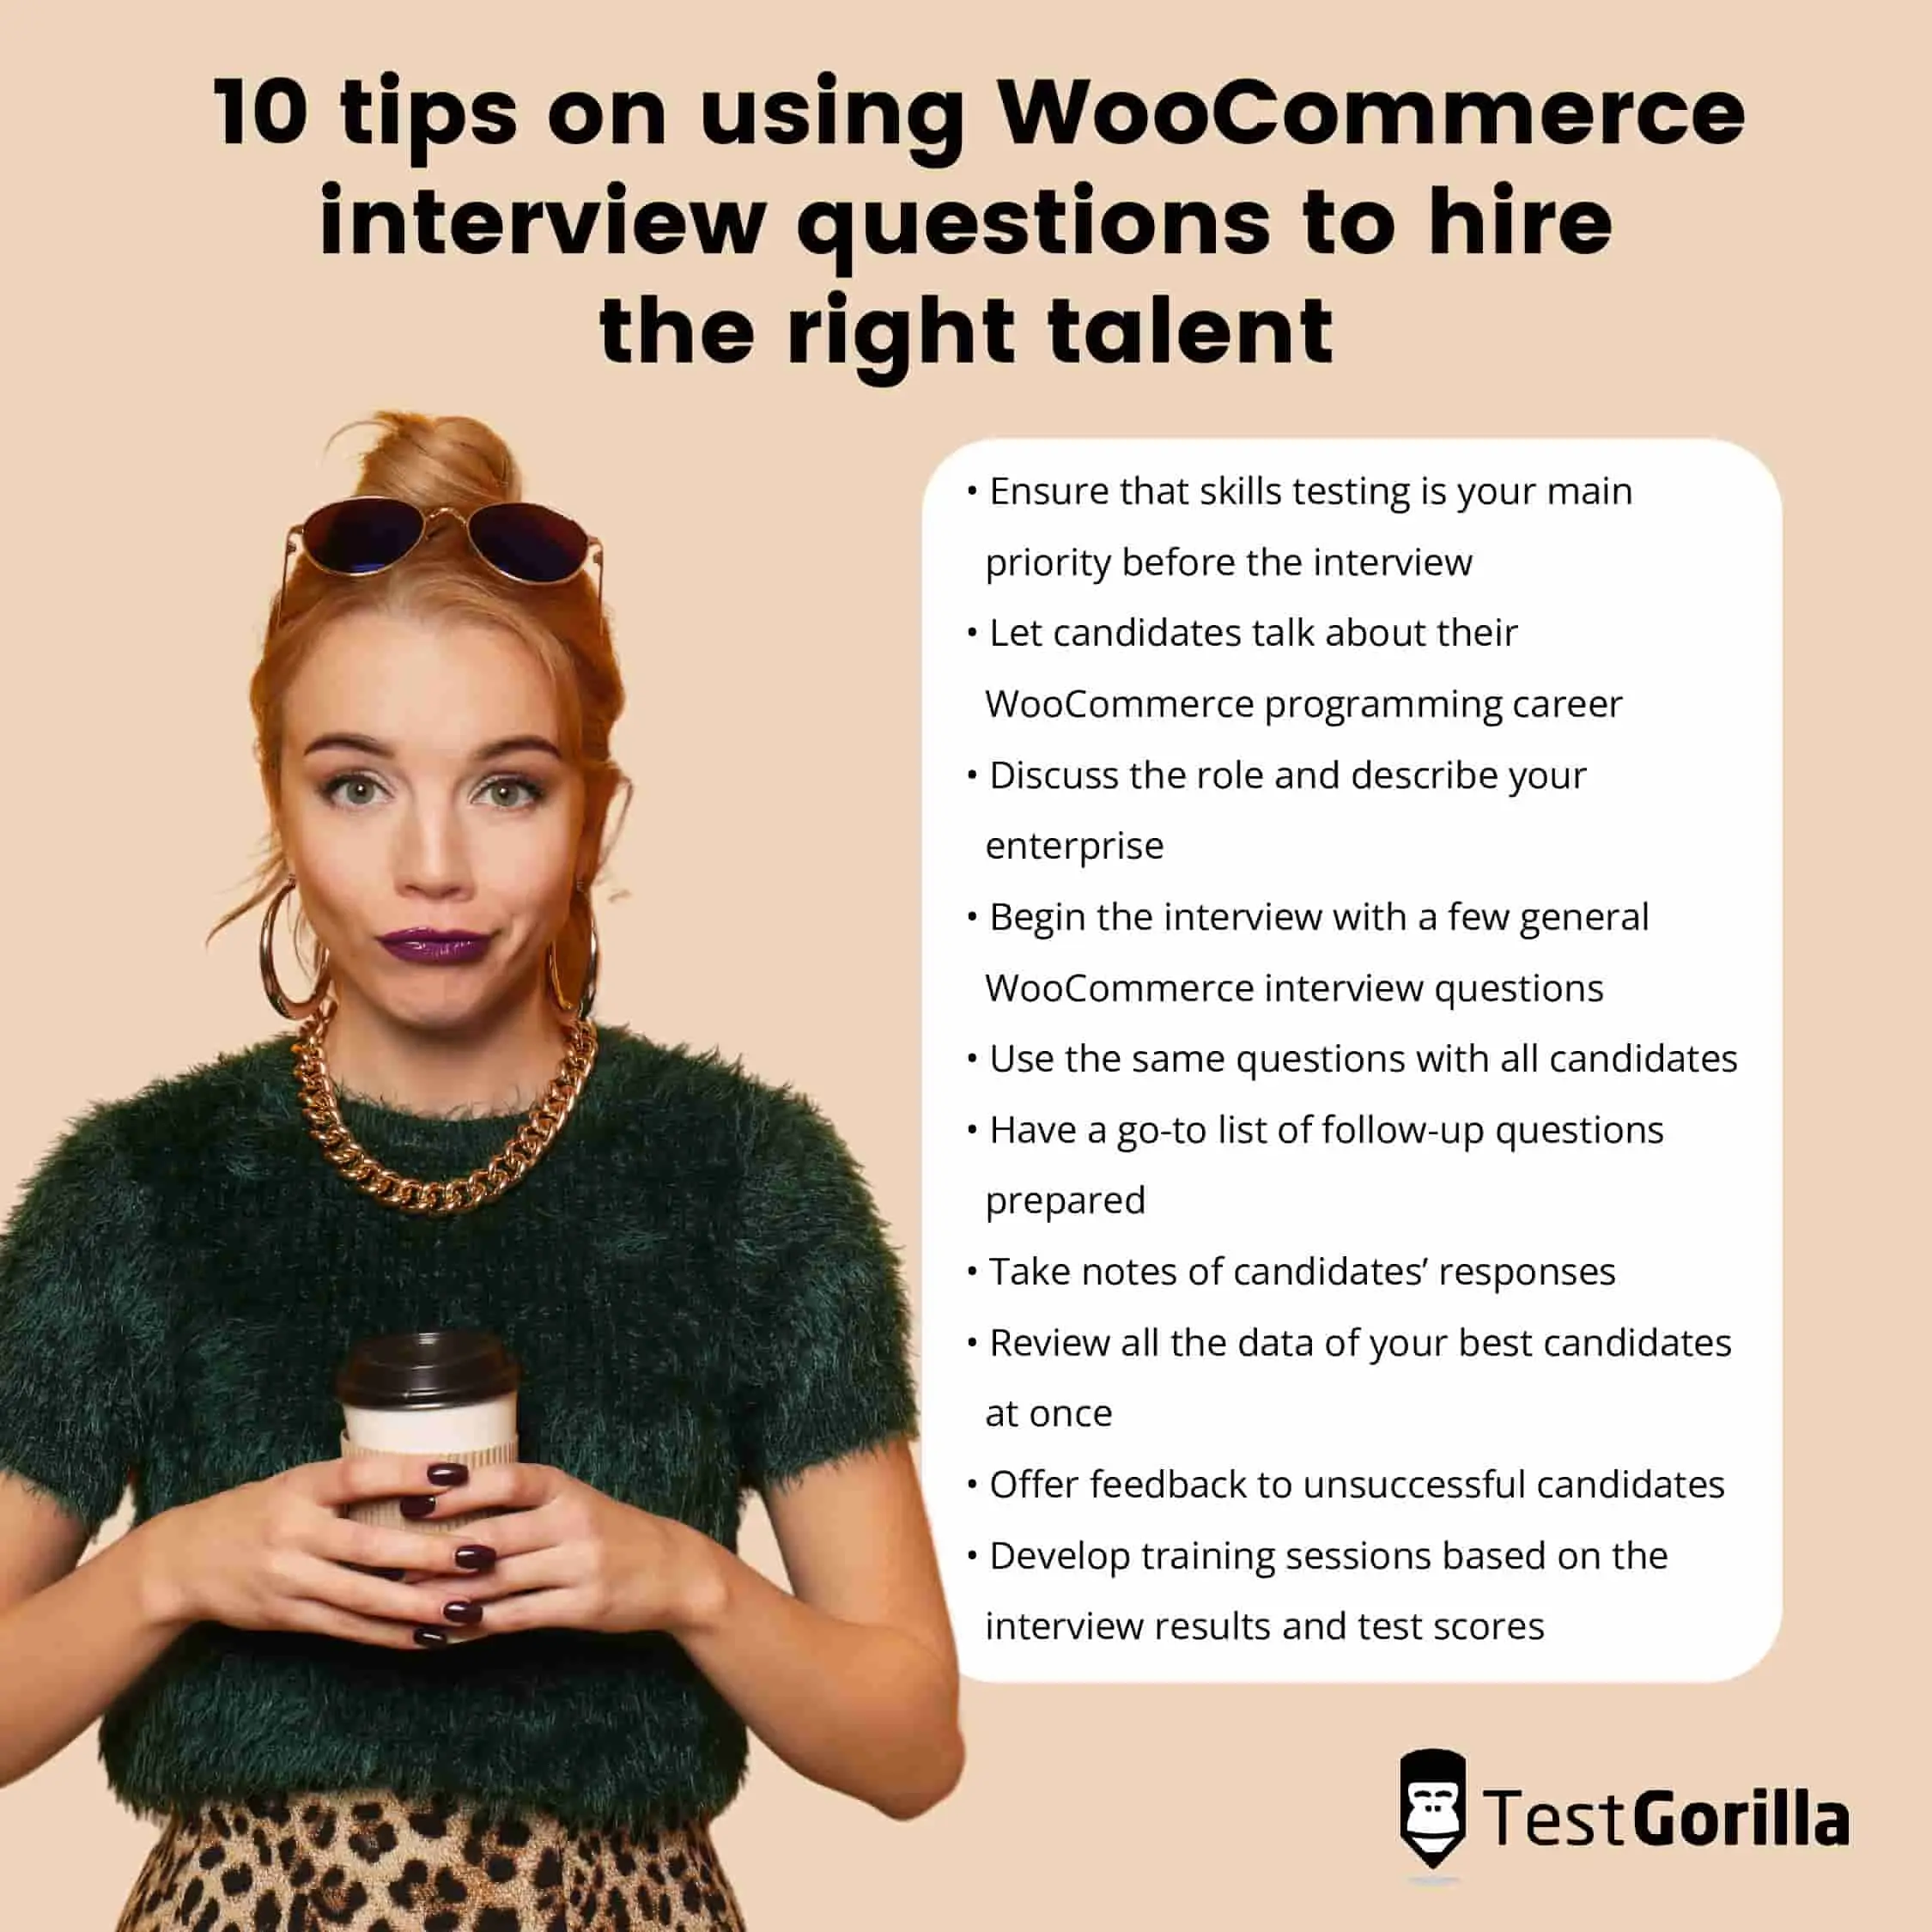 image listing 10 tips on using WooCommerce interview questions to hire the right talent